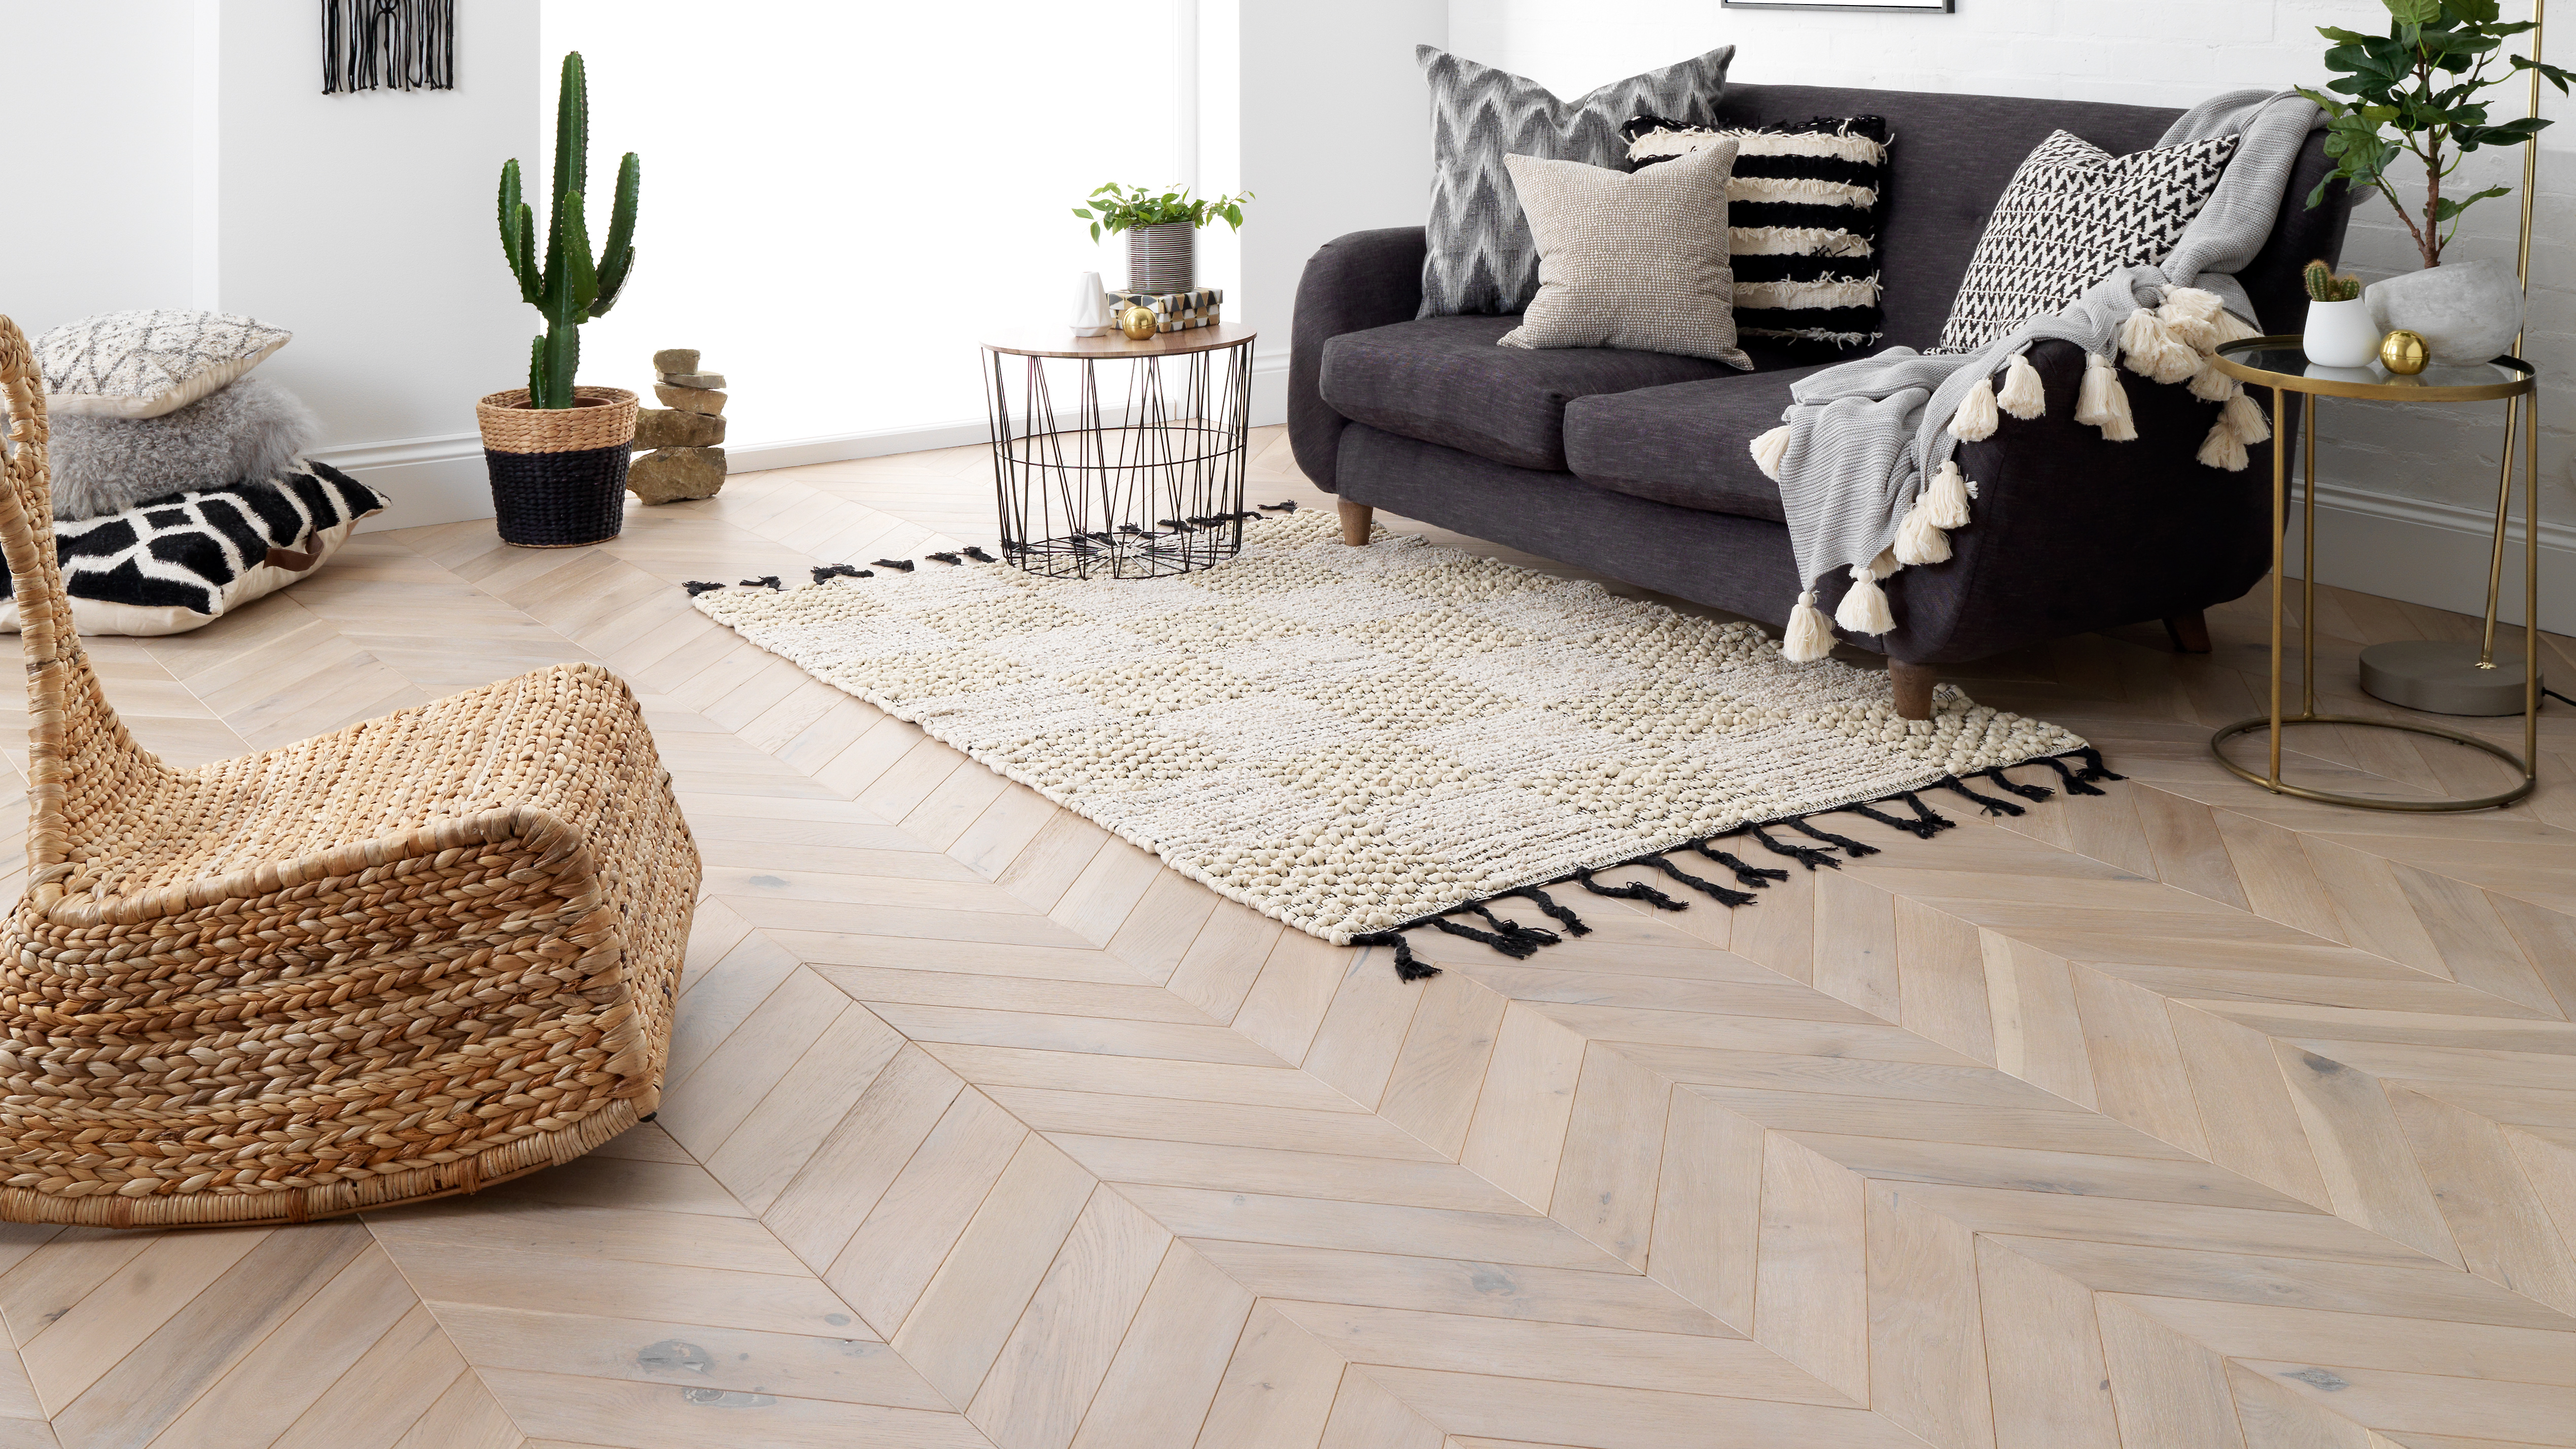 How To Choose The Best Wood Flooring